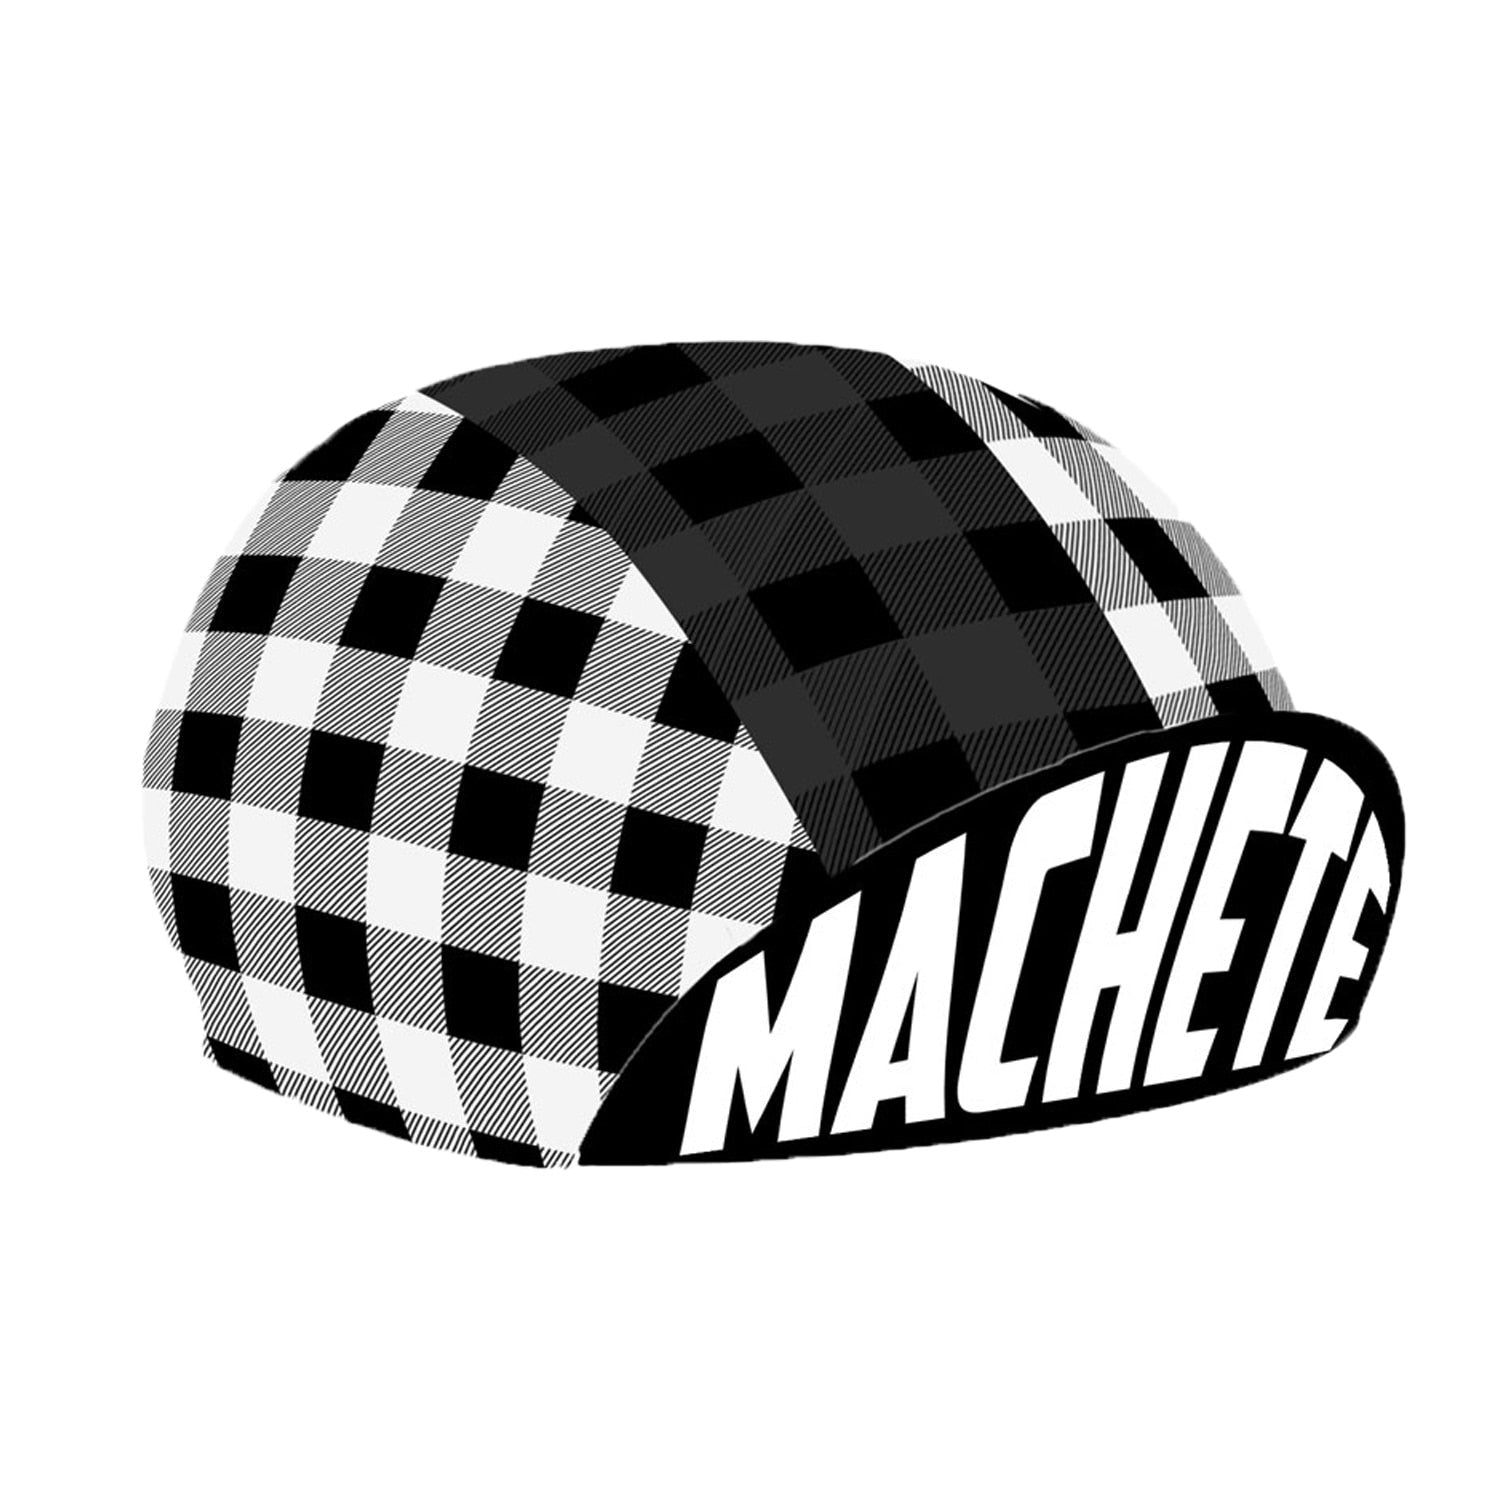 Classic Retro Black White Lattice Polyester Quick Dry Cycling Caps Road Team Bike Balaclava Breathable Bicycle Men's Hat